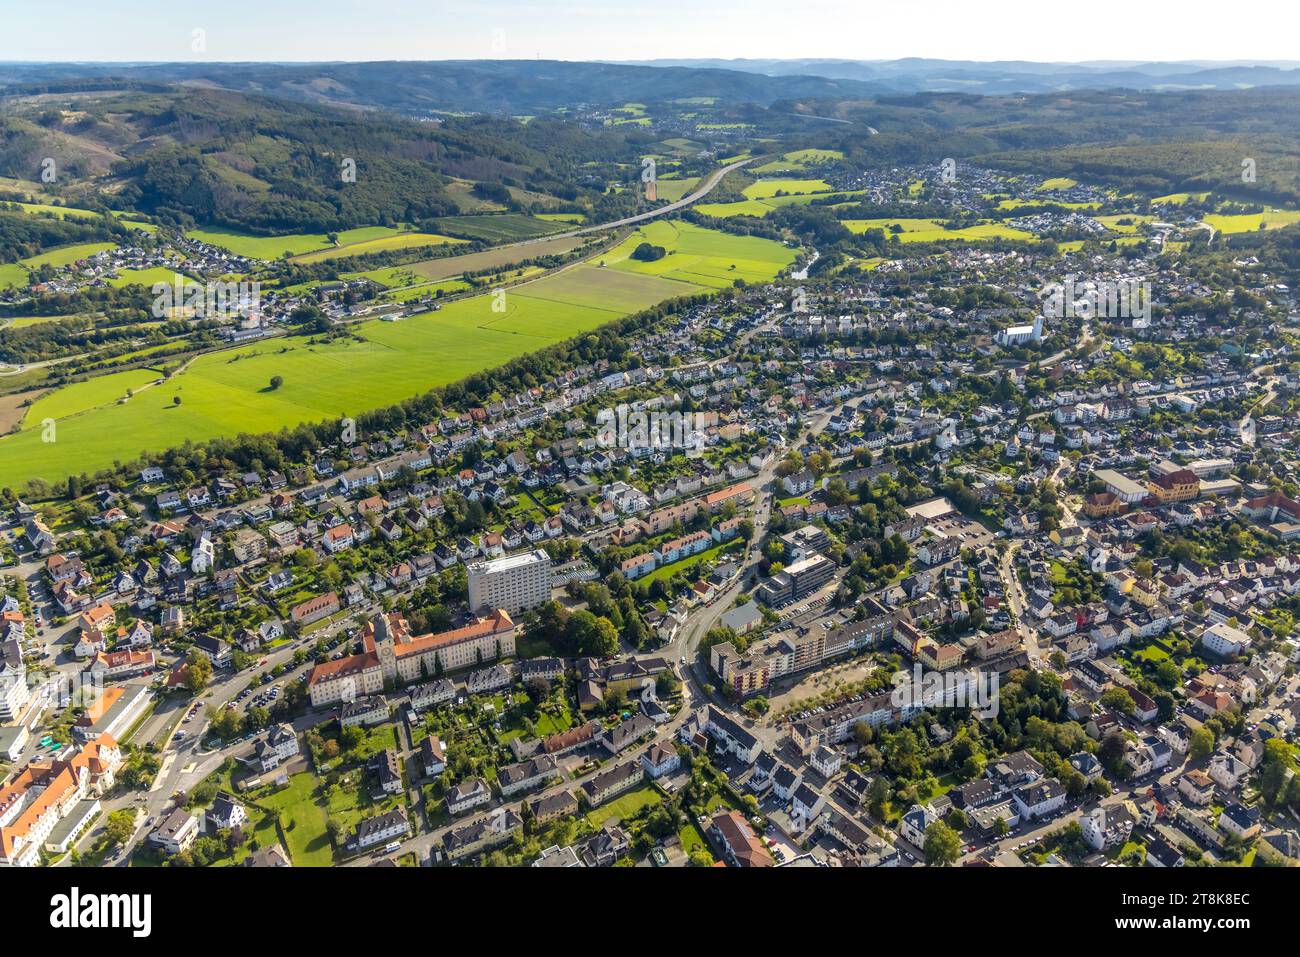 Aerial view, view of town and district government high-rise building, Lüsenberg Ruhraue landscape conservation area and A46 highway, St. Pius Catholic Stock Photo